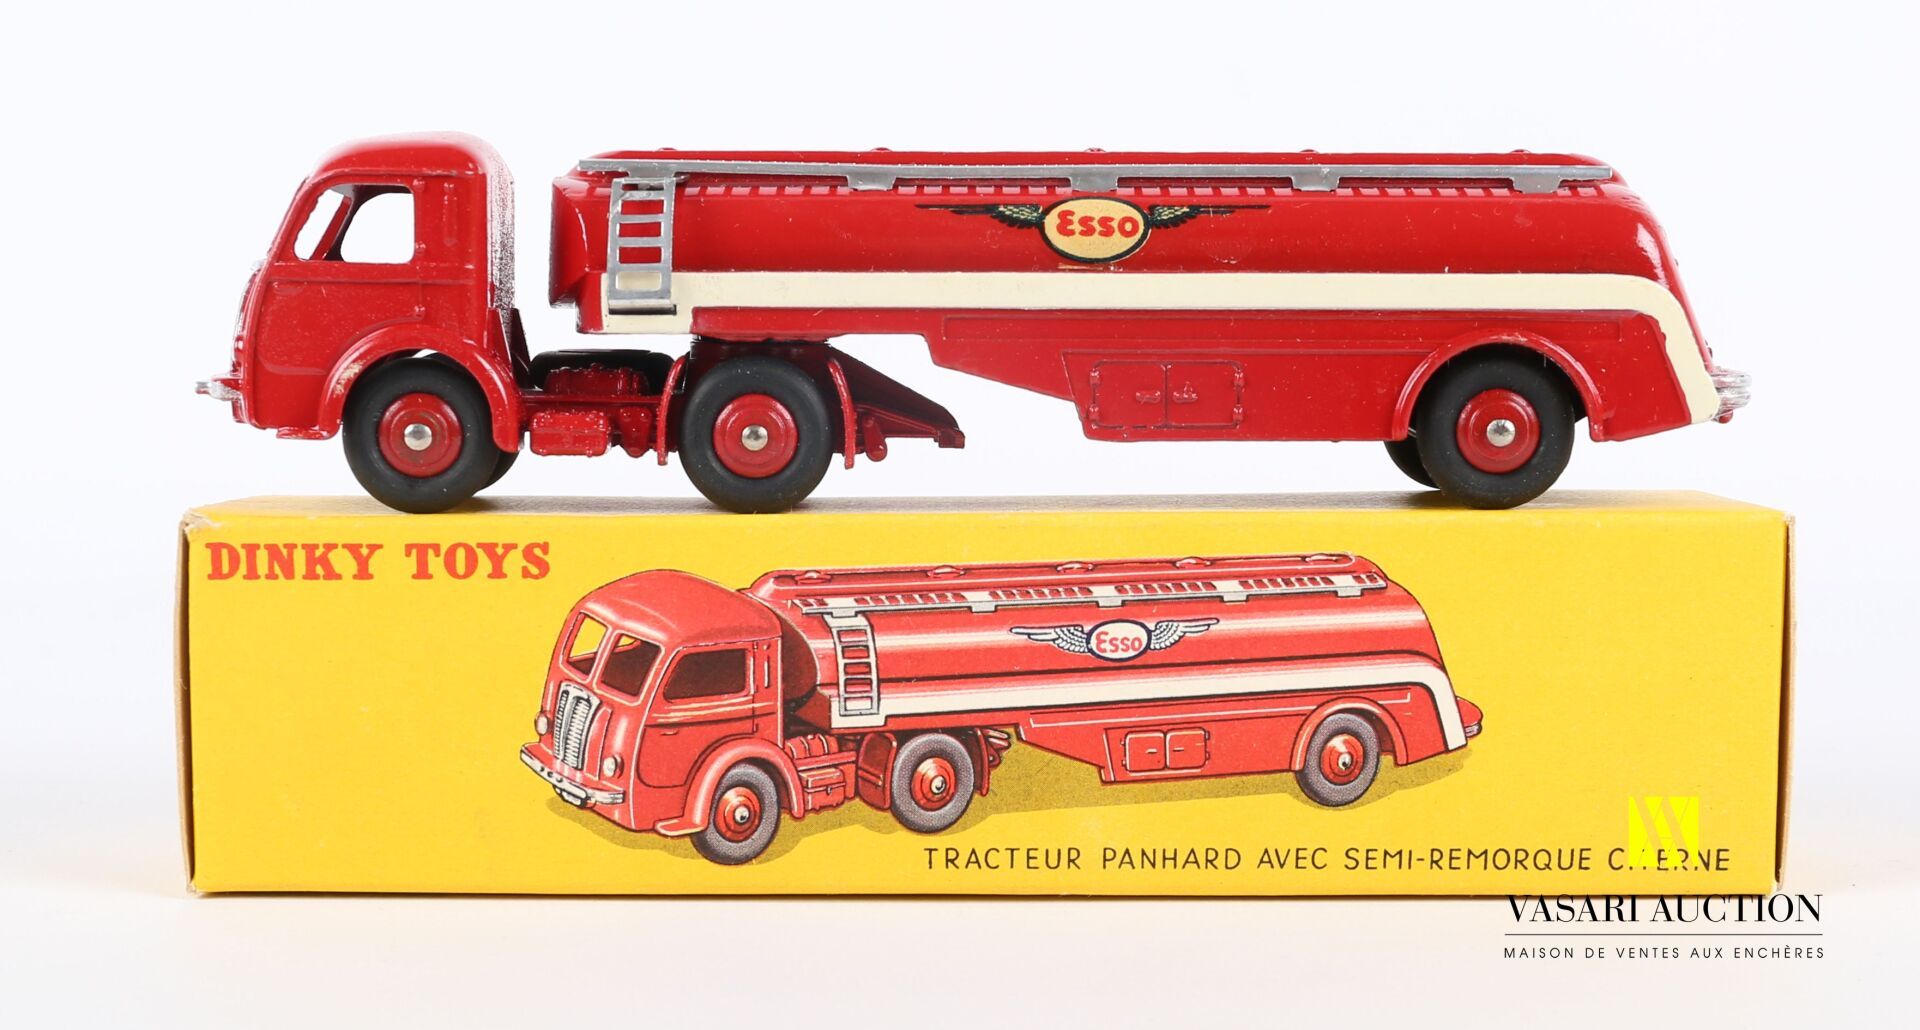 Null DINKY TOYS (FR)

Panhard tractor with tanker trailer Ref 32C

(original box&hellip;